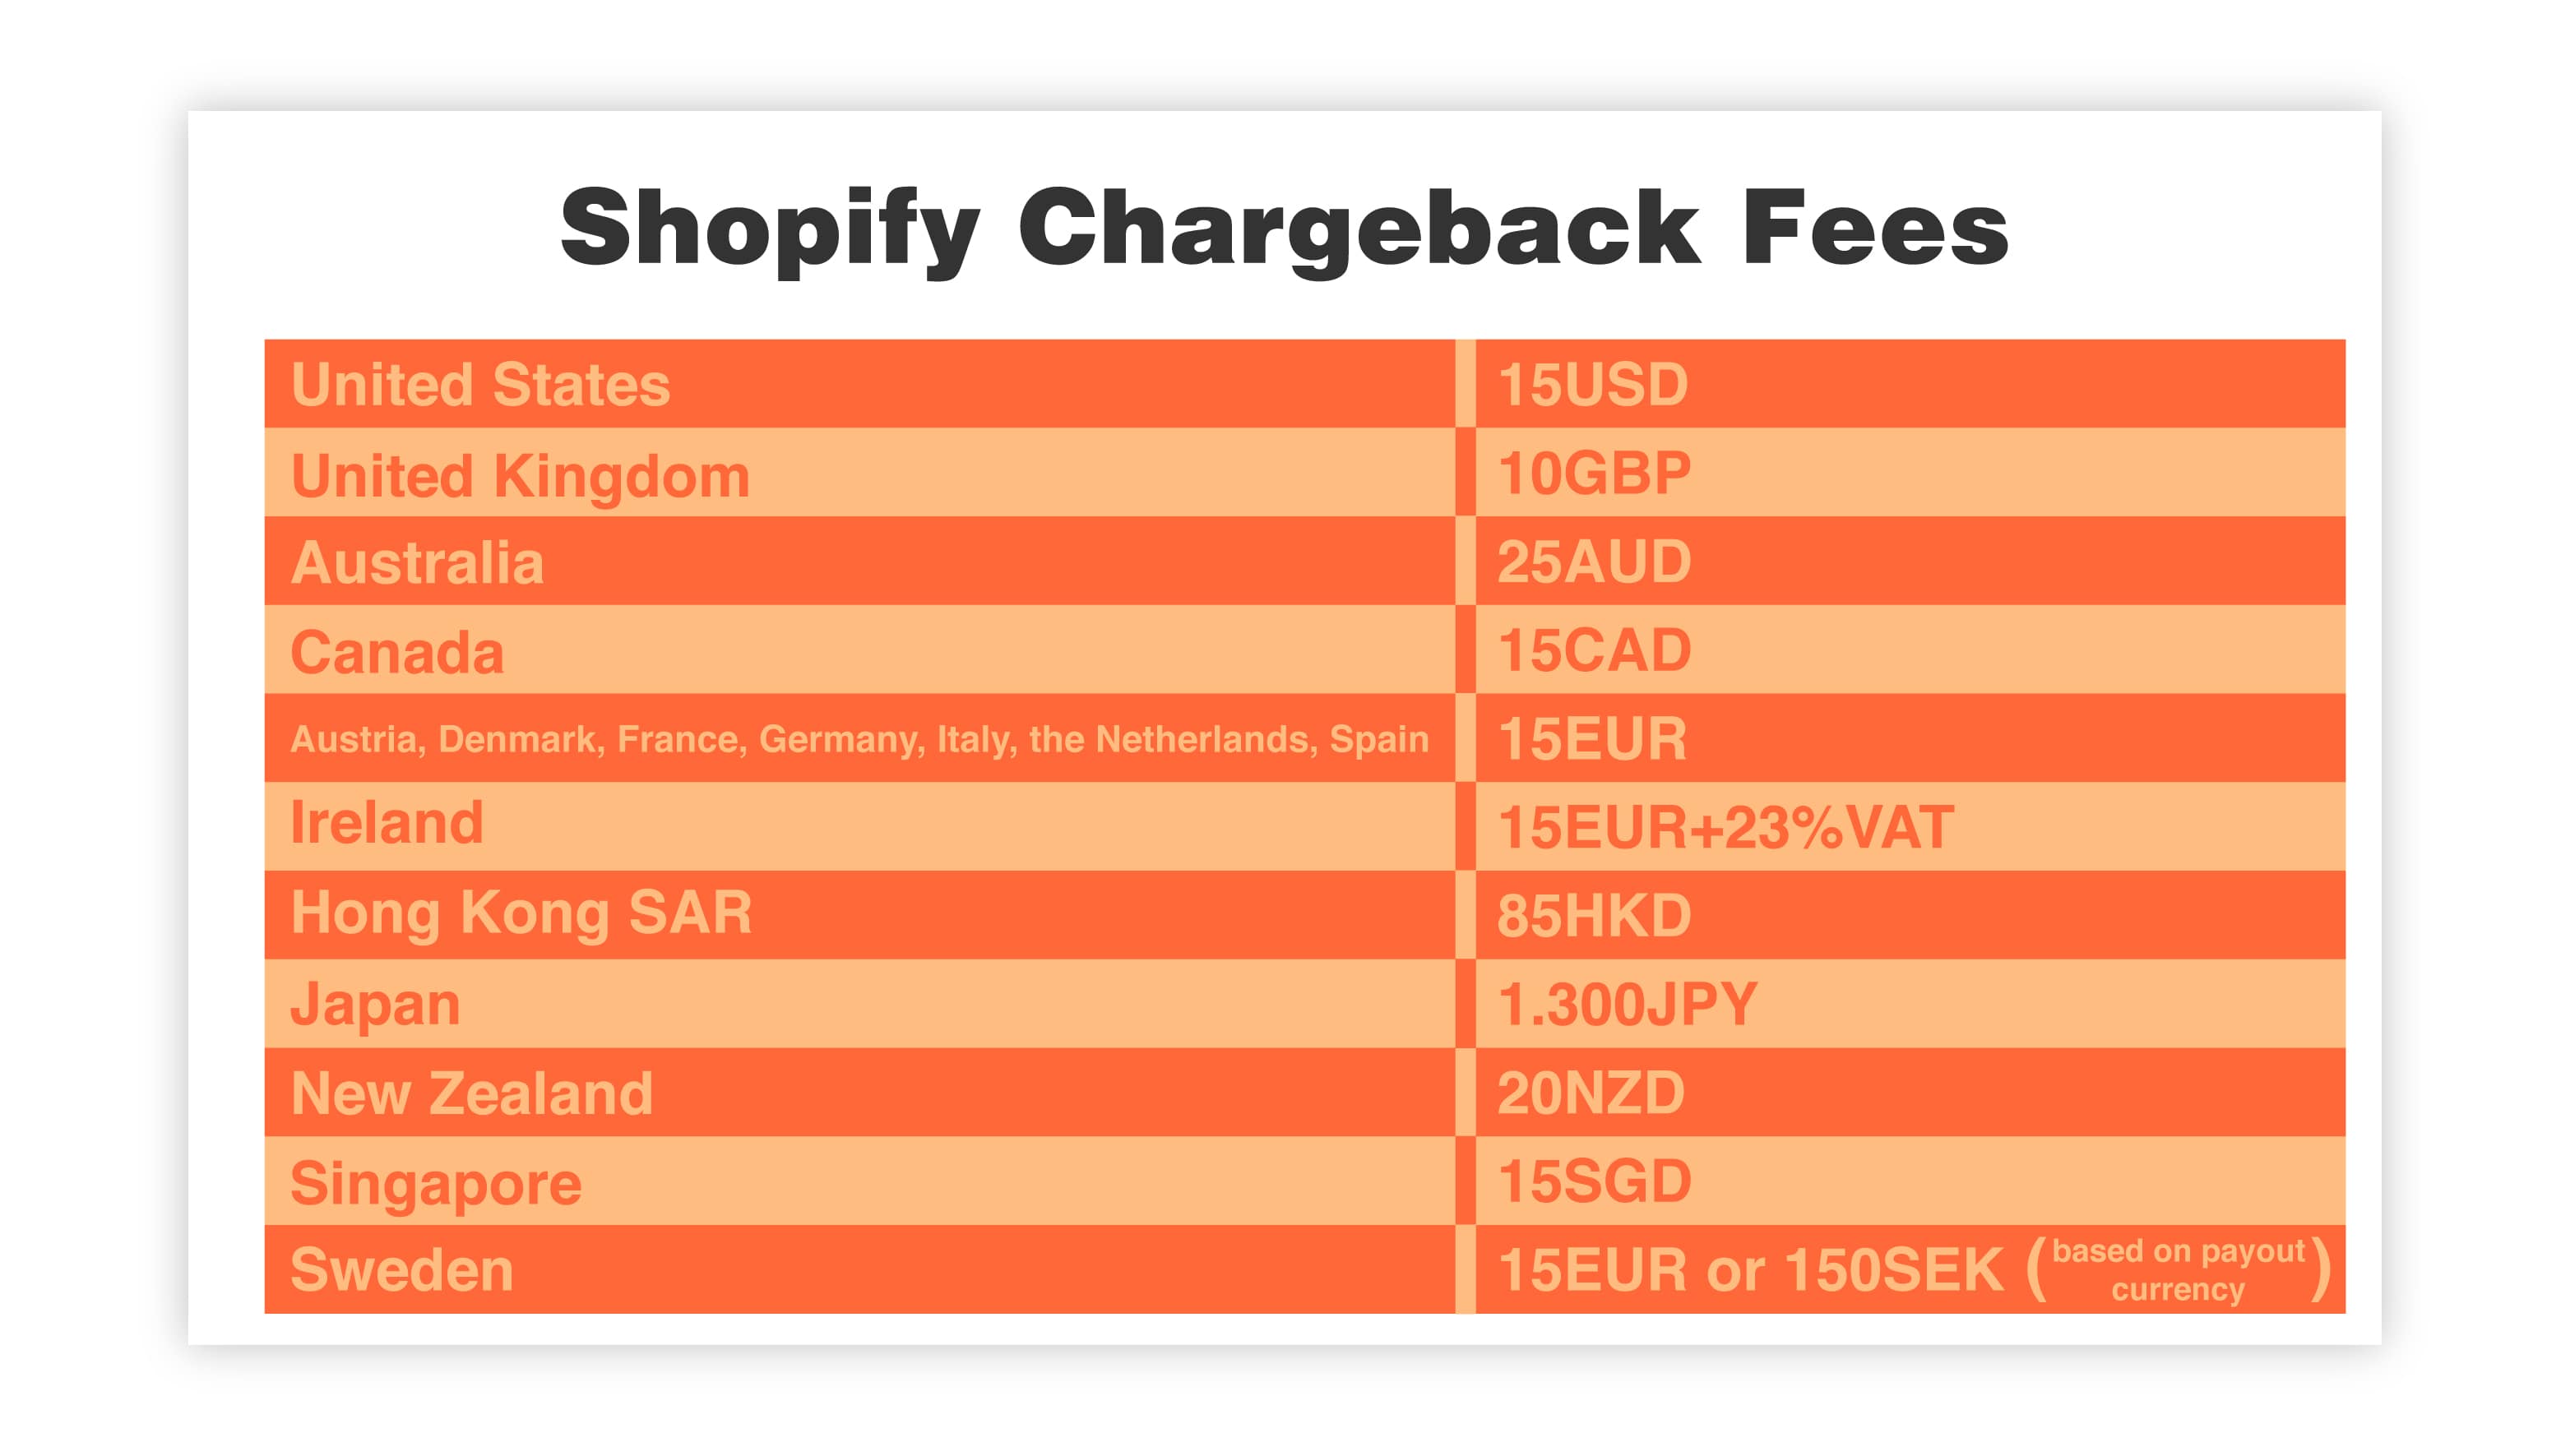 Shopify Chargeback Fees